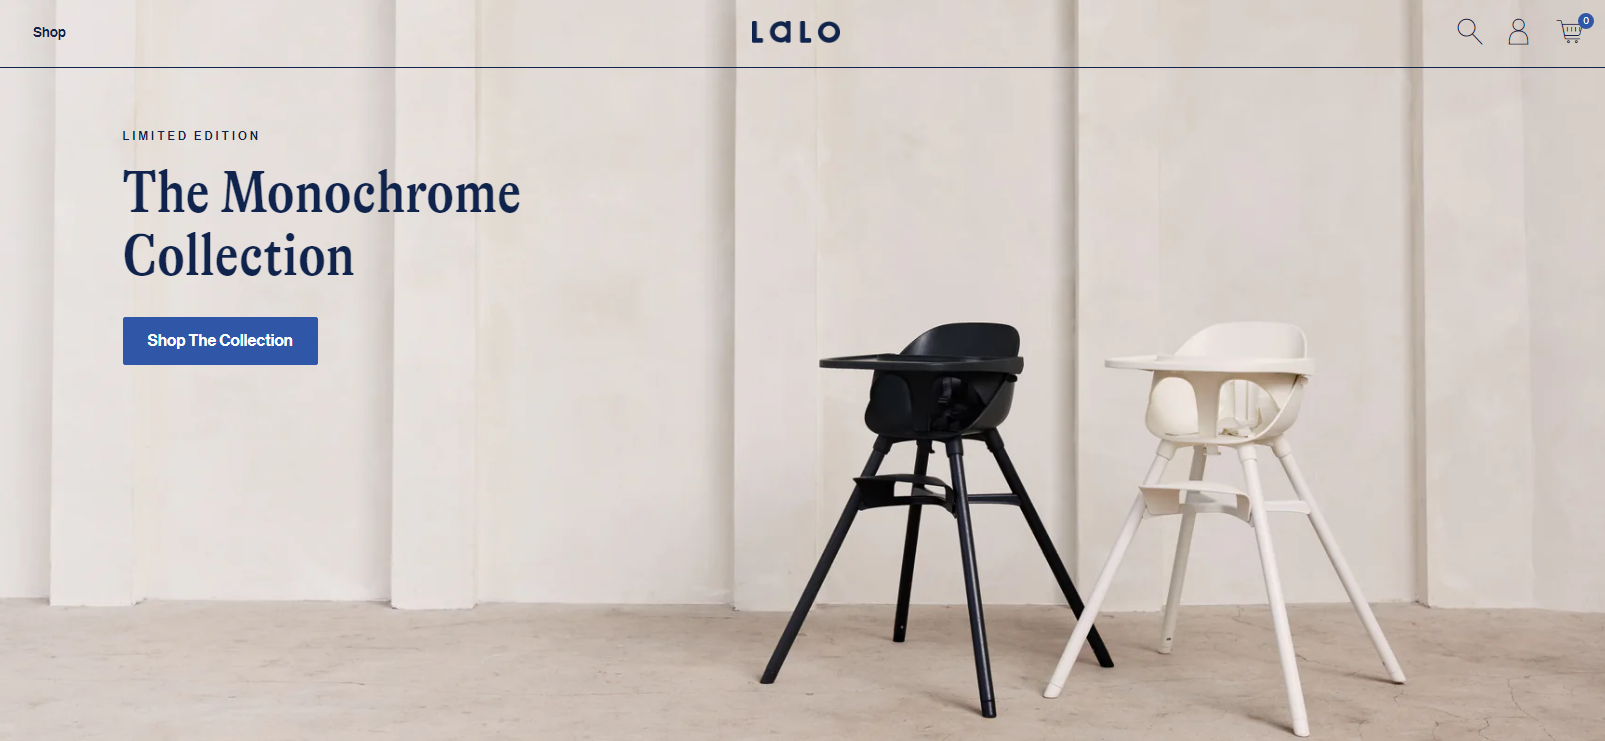 Lalo Secures $10.1 Million in Series A Funding to Revolutionize the Baby and Toddler Retail Industry